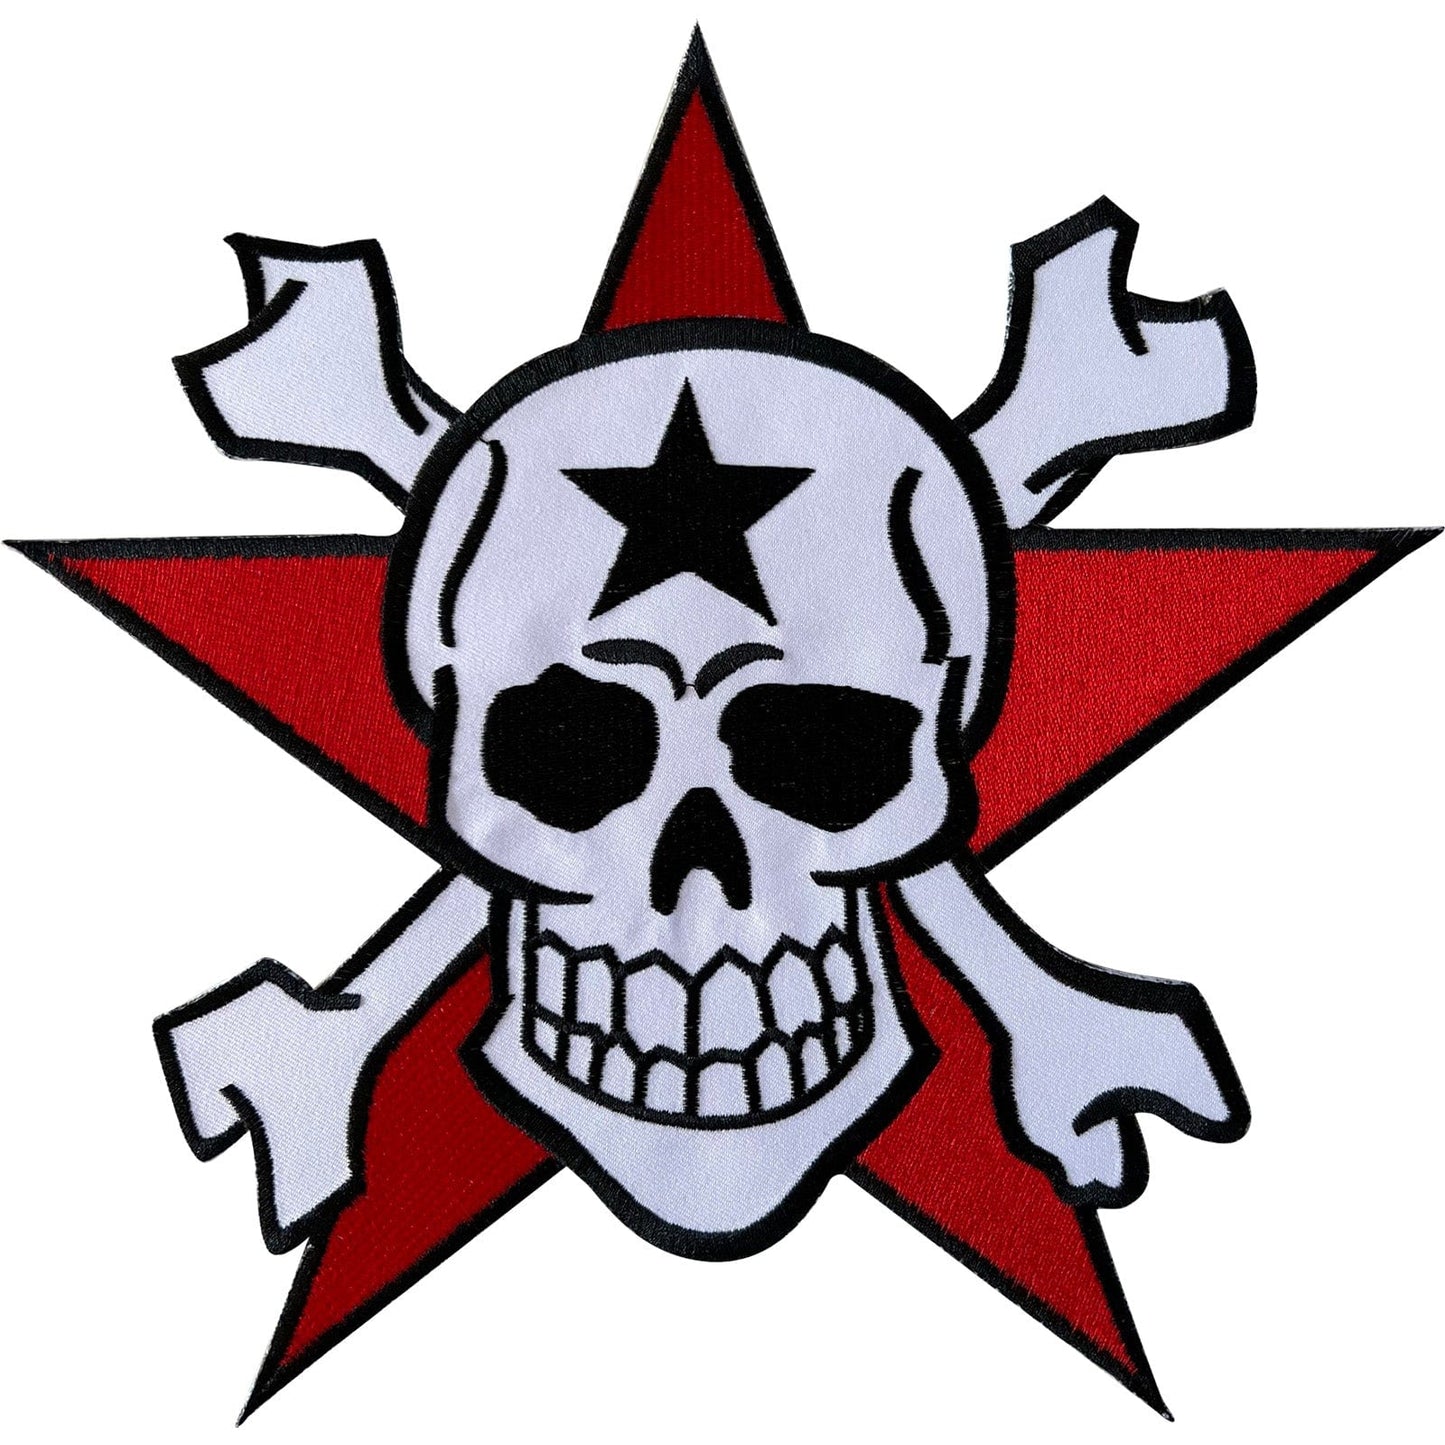 Big Large Skull Crossbones Red Star Patch Iron Sew On Jacket Embroidered Badge